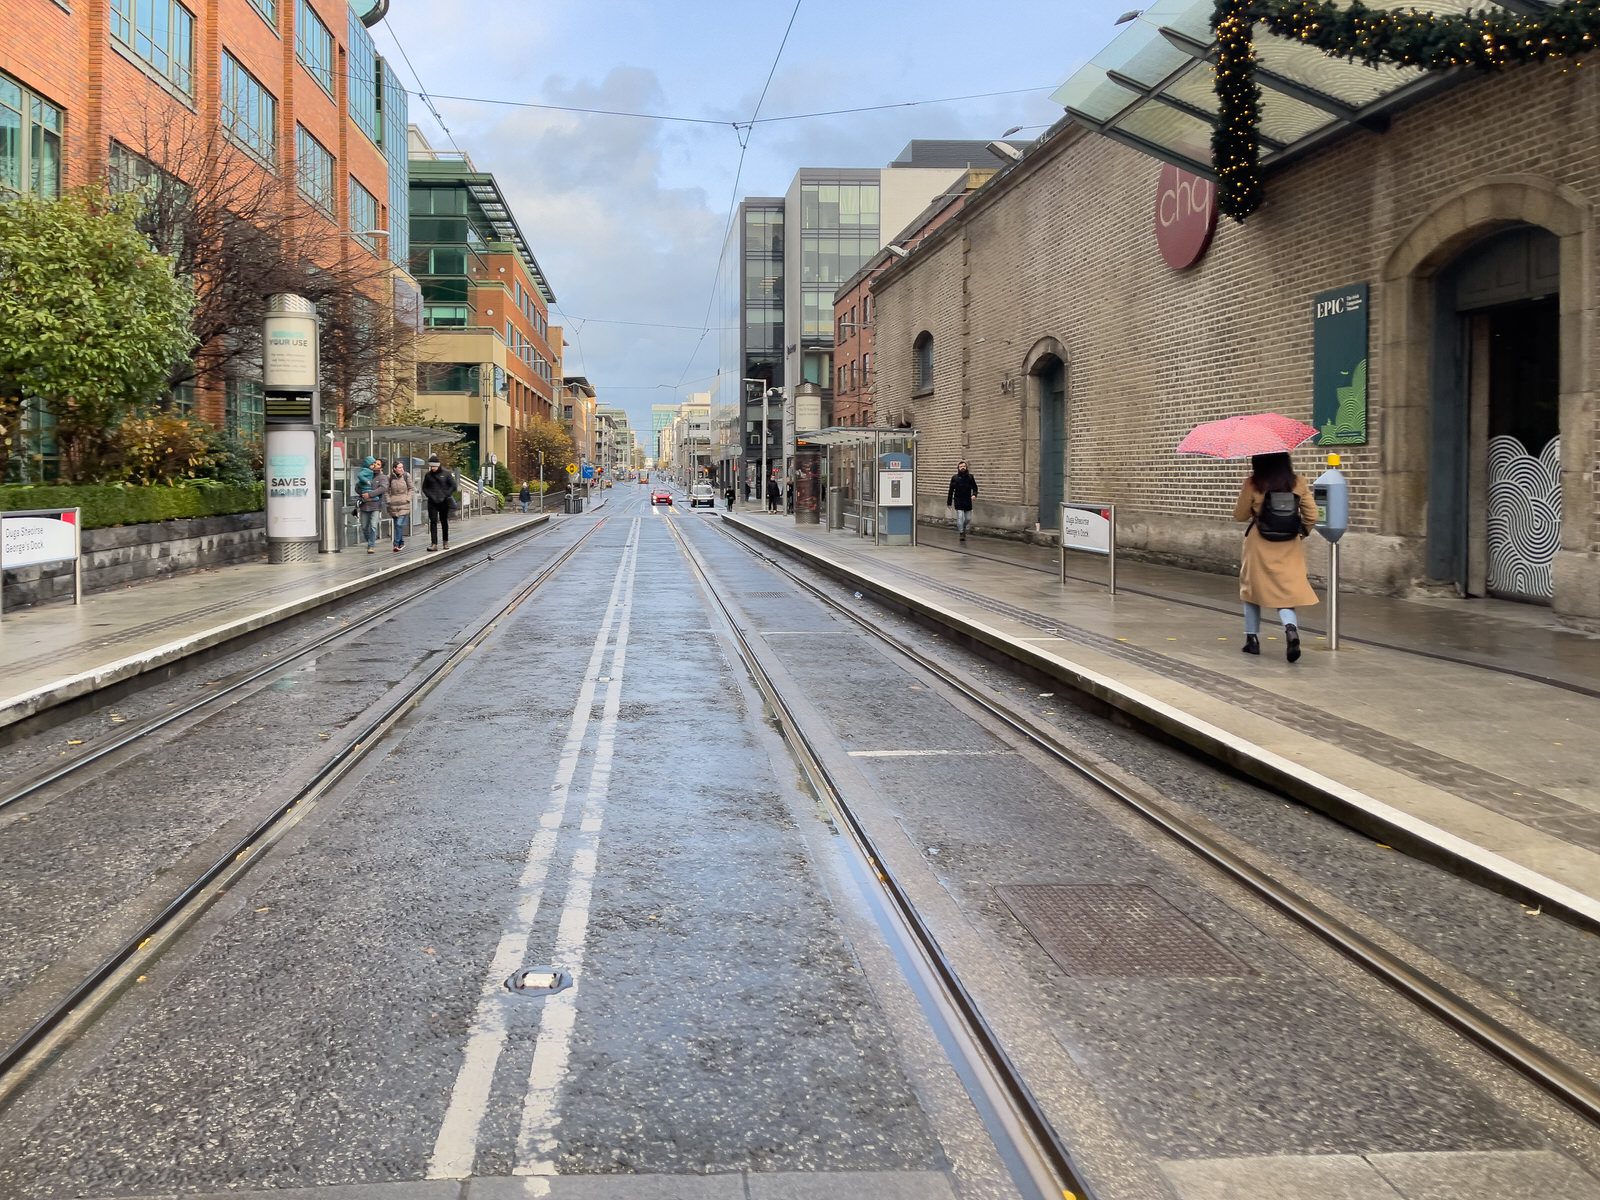 THE LUAS TRAM STOP AT GEORGE'S DOCK 006